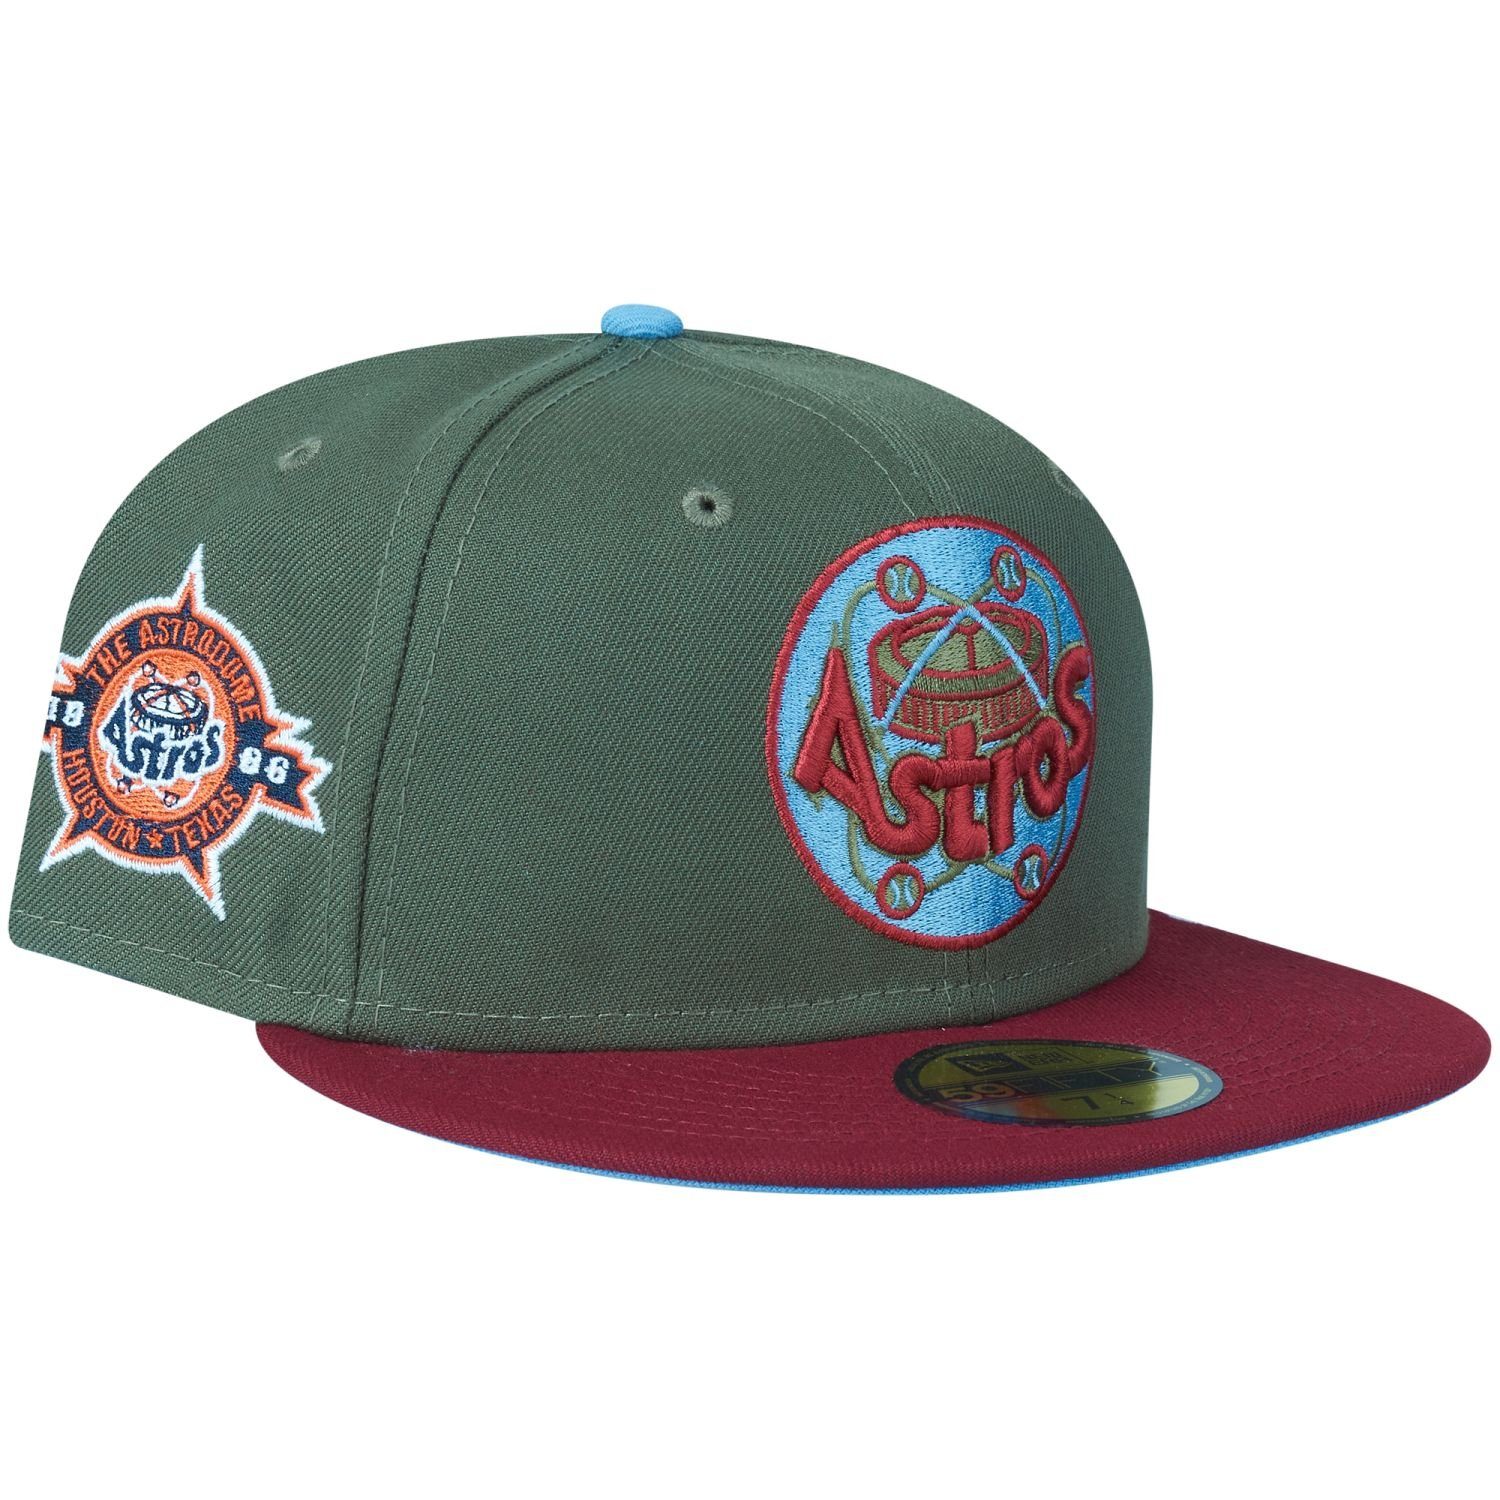 New Era Fitted Cap ASTRODOME Houston 59Fifty Astros